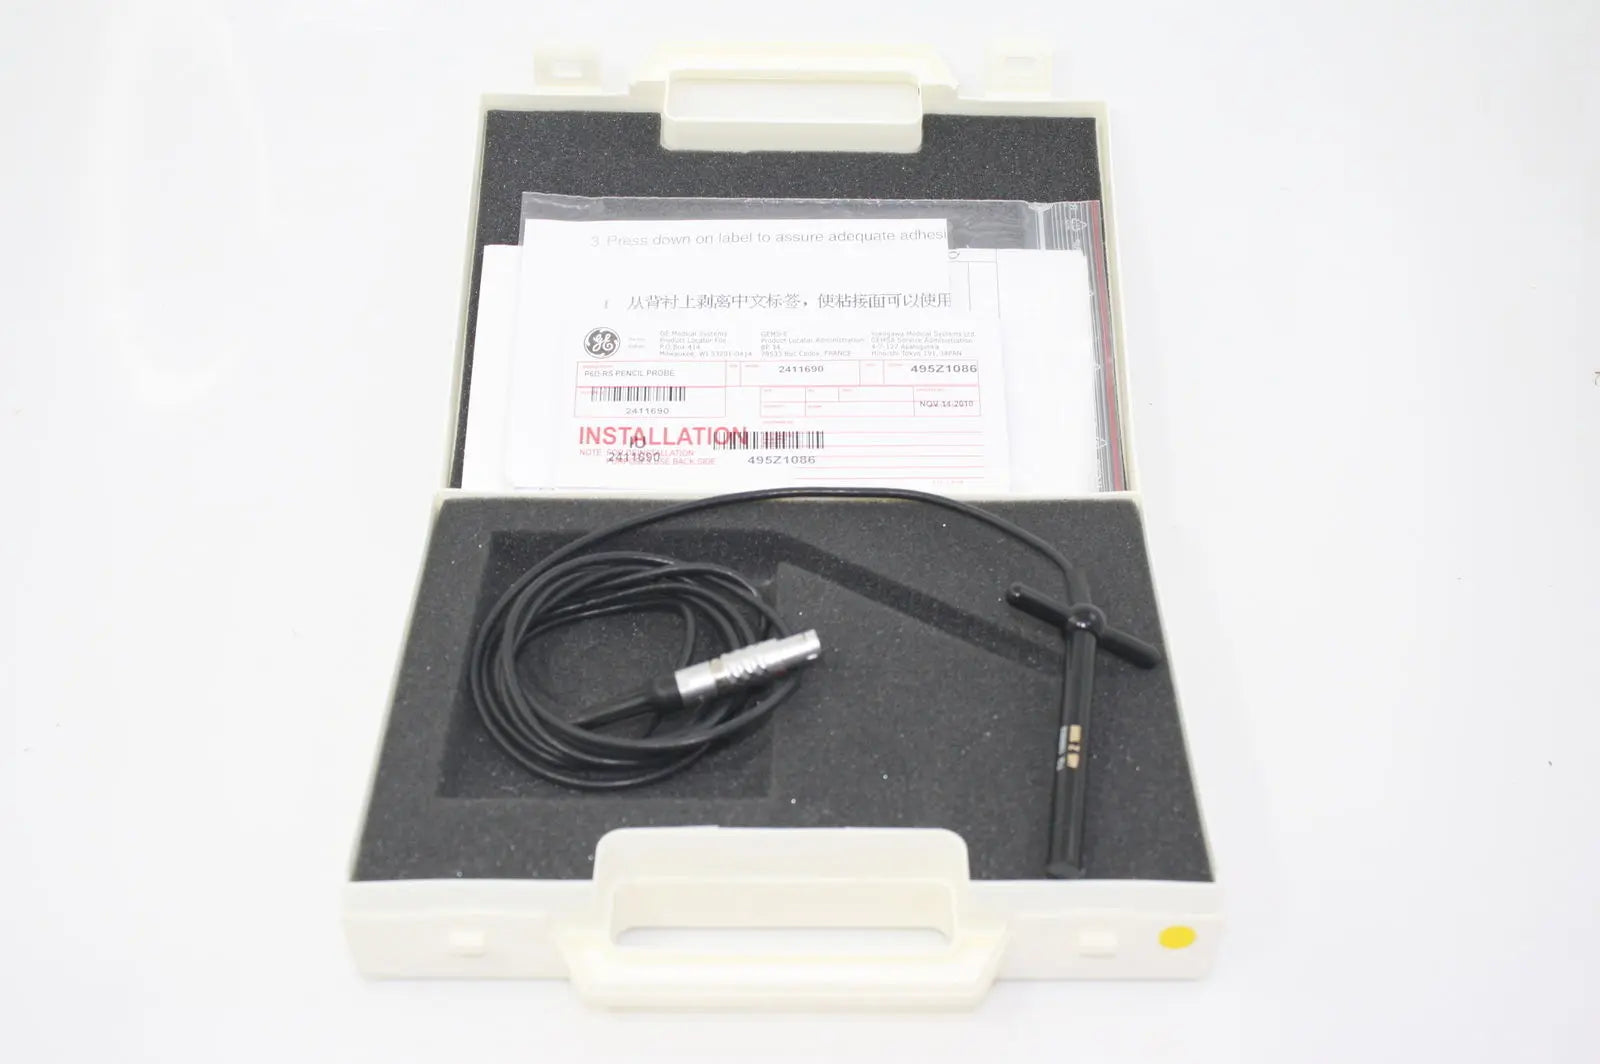 NEW P6D-RS Ultrasound Pencil Probe Transducer- TESTED DIAGNOSTIC ULTRASOUND MACHINES FOR SALE